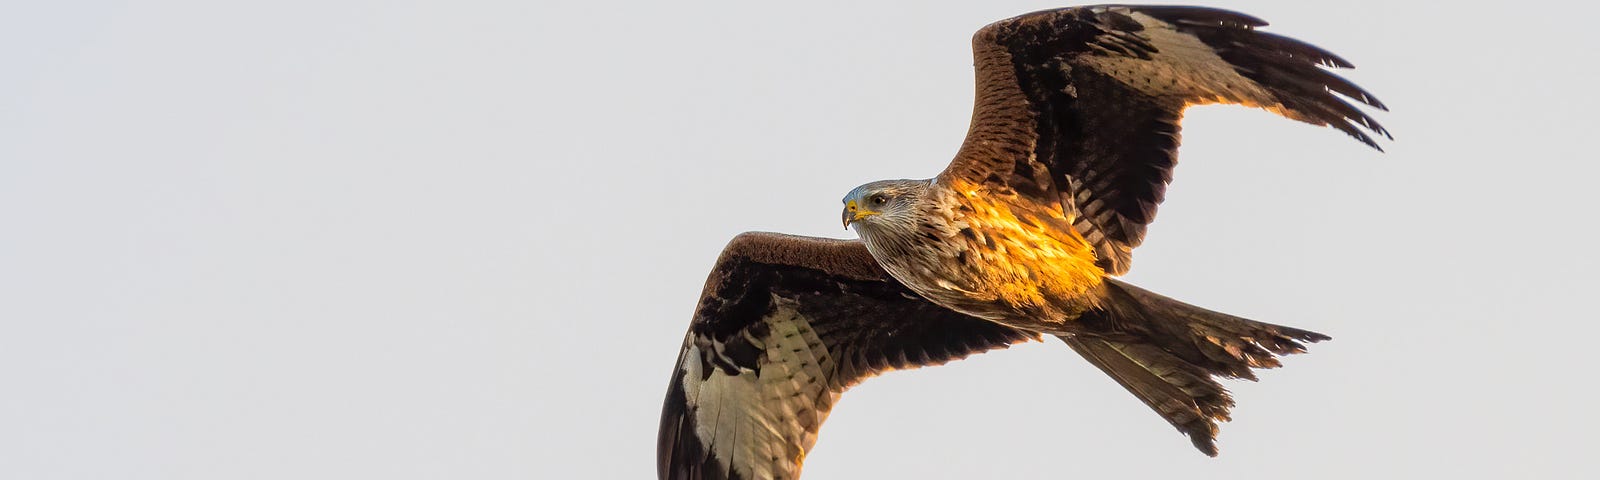 close up shot of a red kite